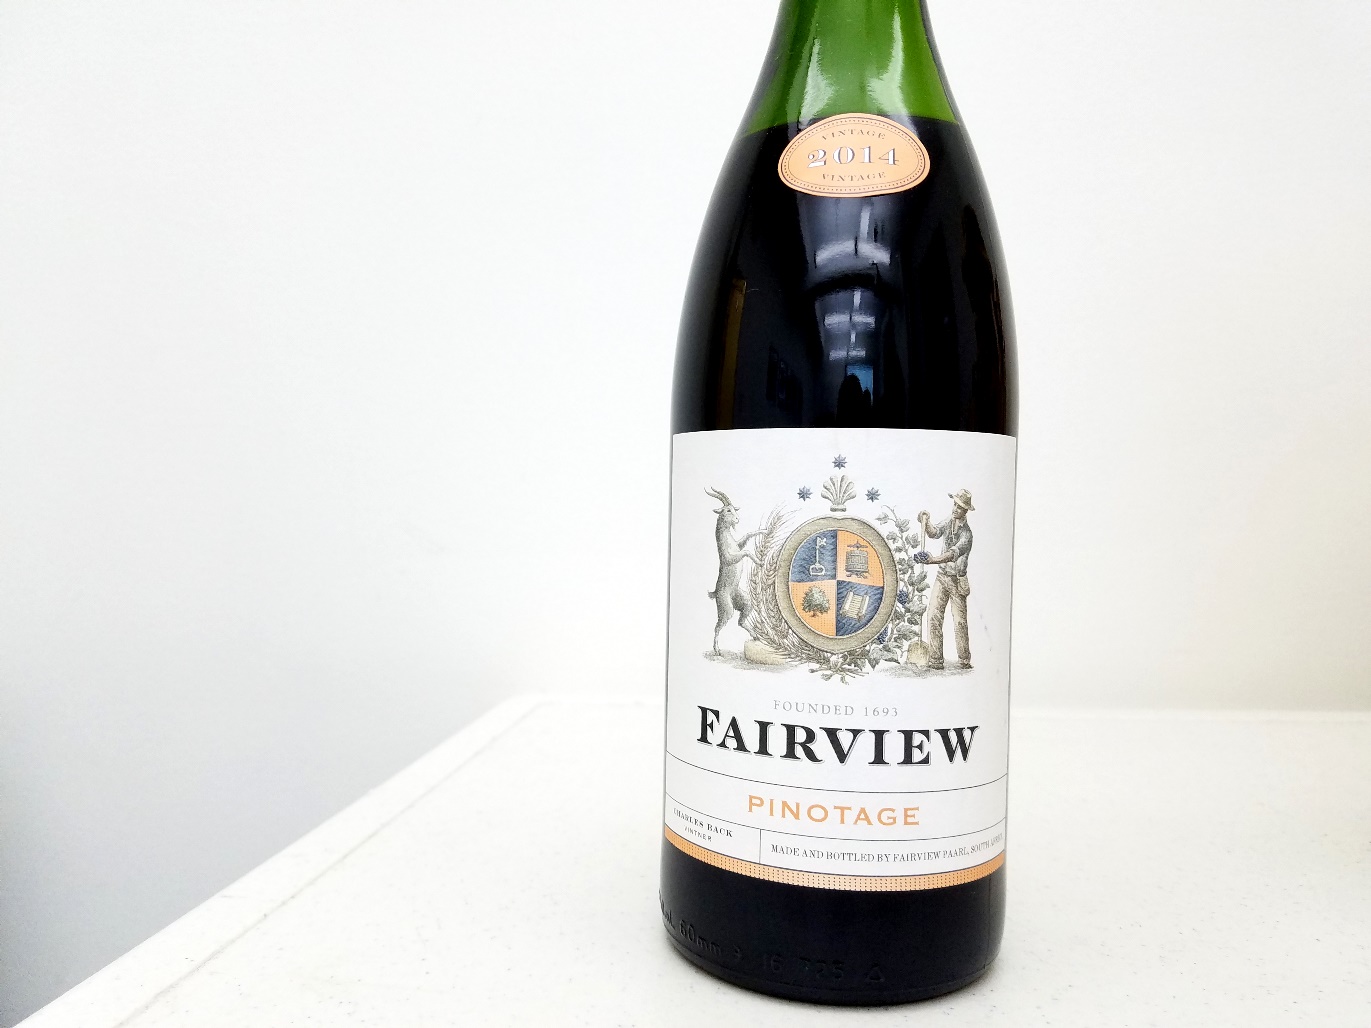 Fairview, Pinotage 2014, Paarl, South Africa, Wine Casual